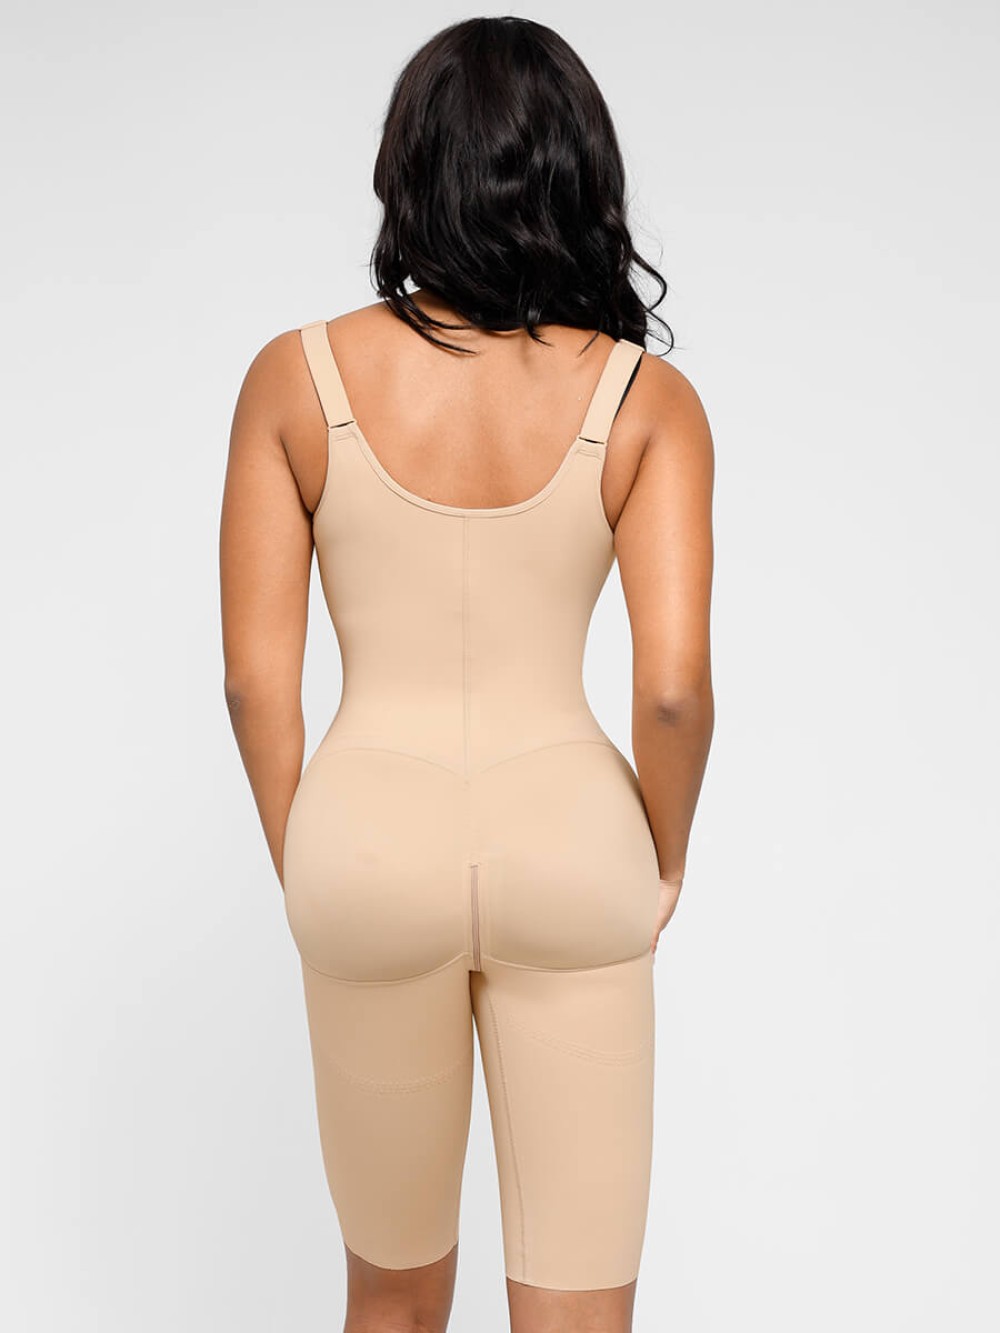 Postoperative U-shaped Chest Support 3-breasted Body Shaper